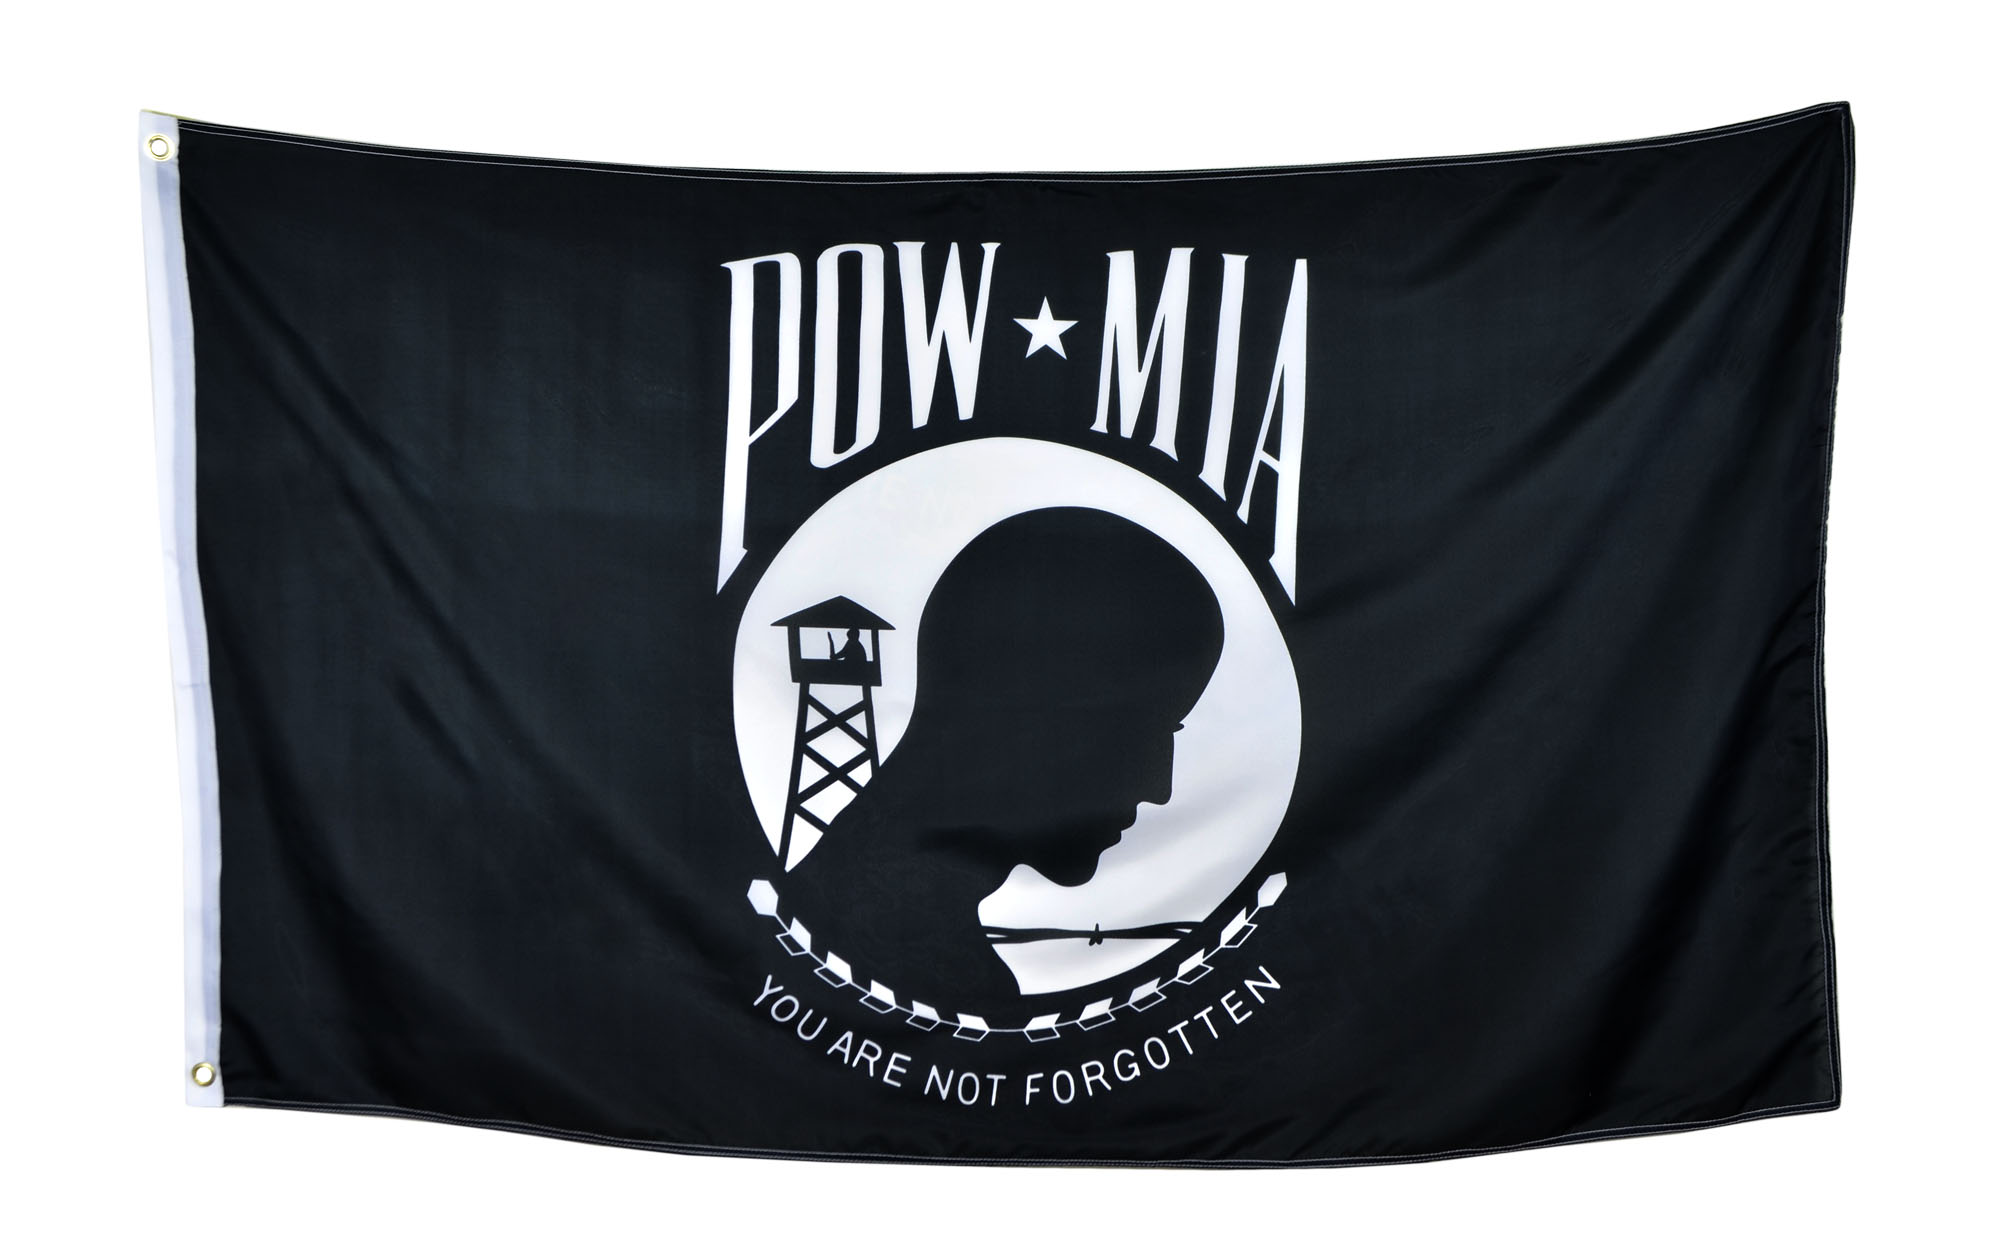 Shop72 - POW-MIA Black Flag You are Not Forgotten Prisoner of War 3x5ft Polyester